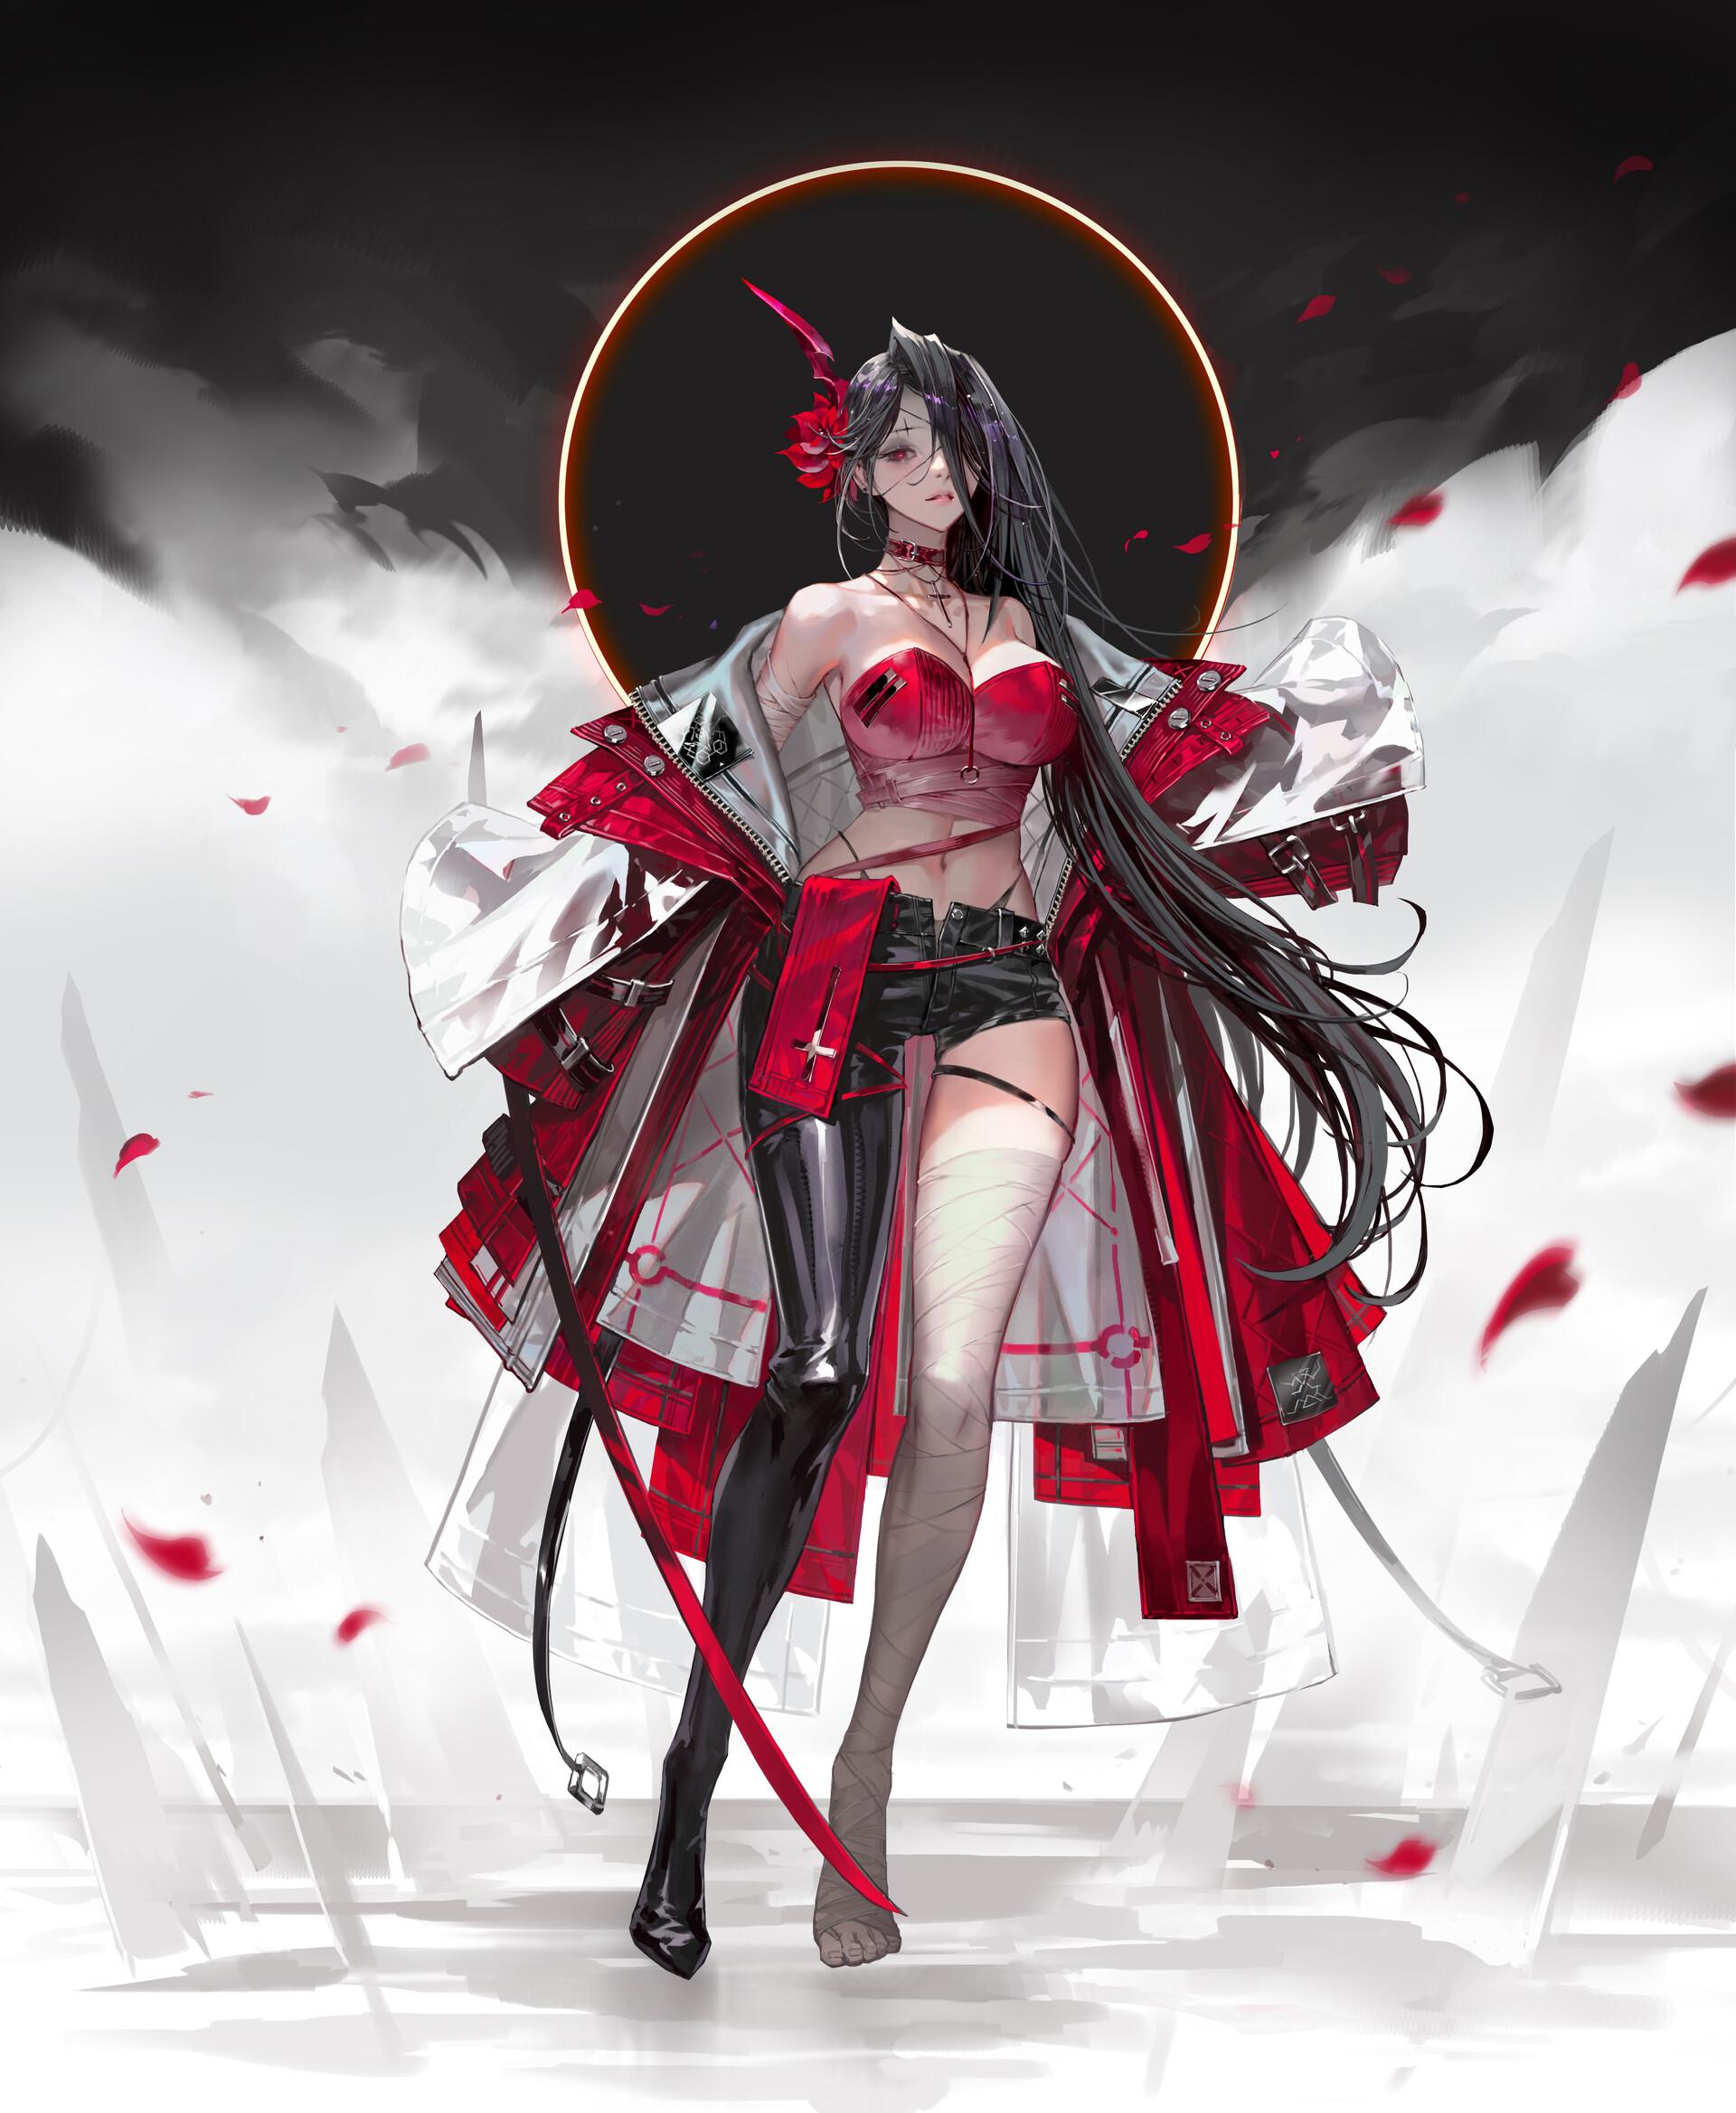 General 1920x2337 Nessi women drawing weapon petals red clothing